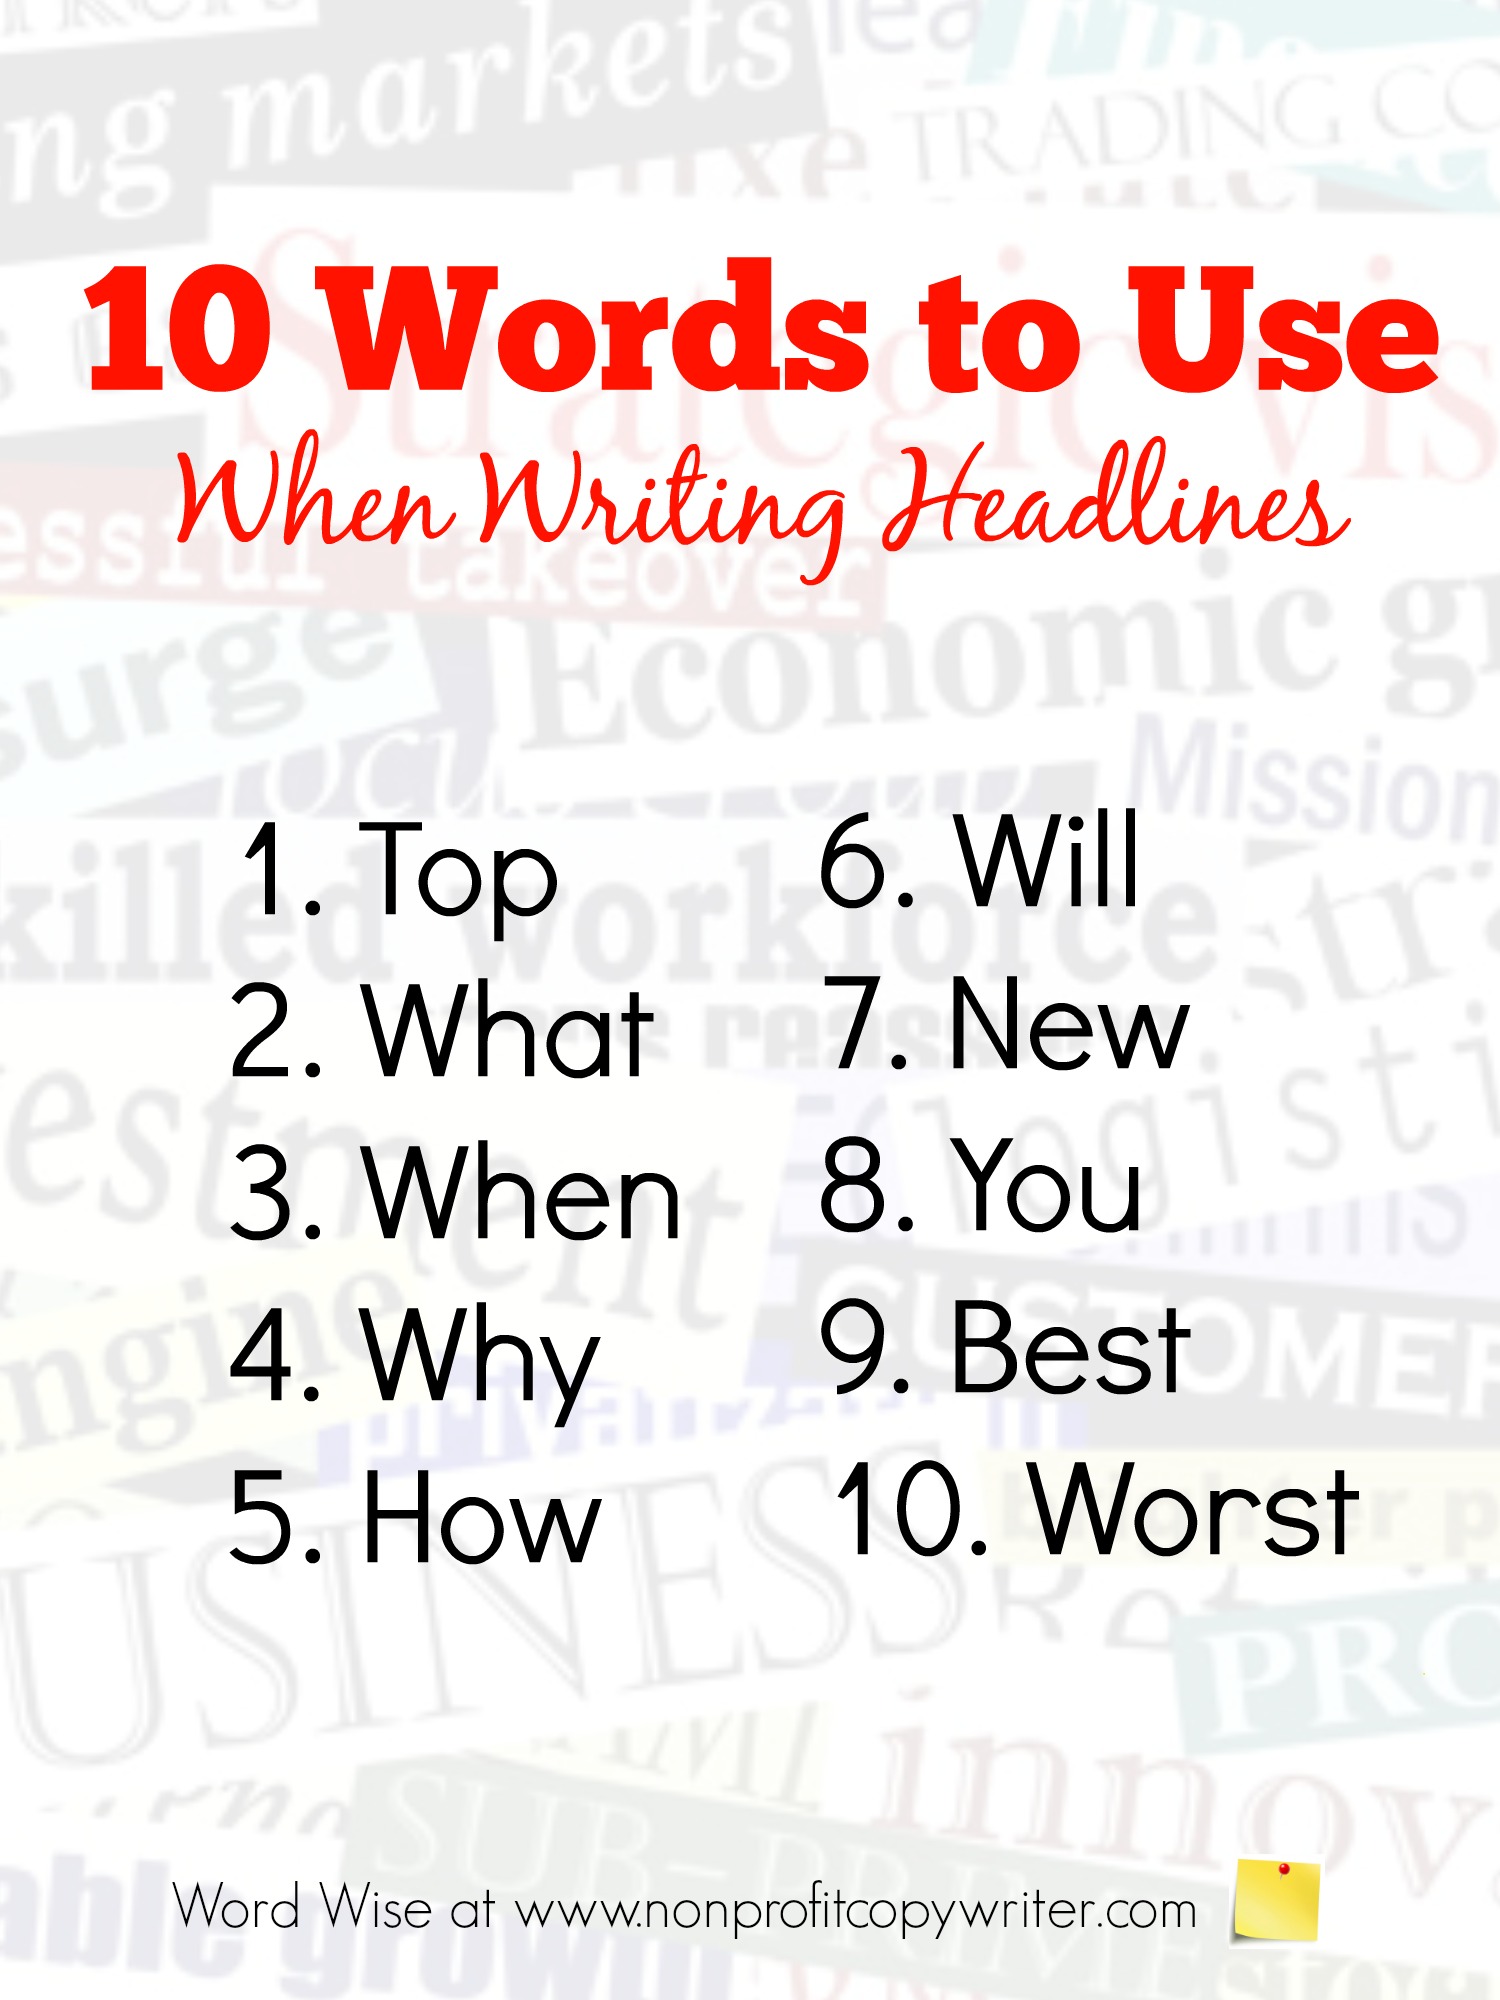 10 words to use when writing headlines with Word Wise at Nonprofit Copywriter